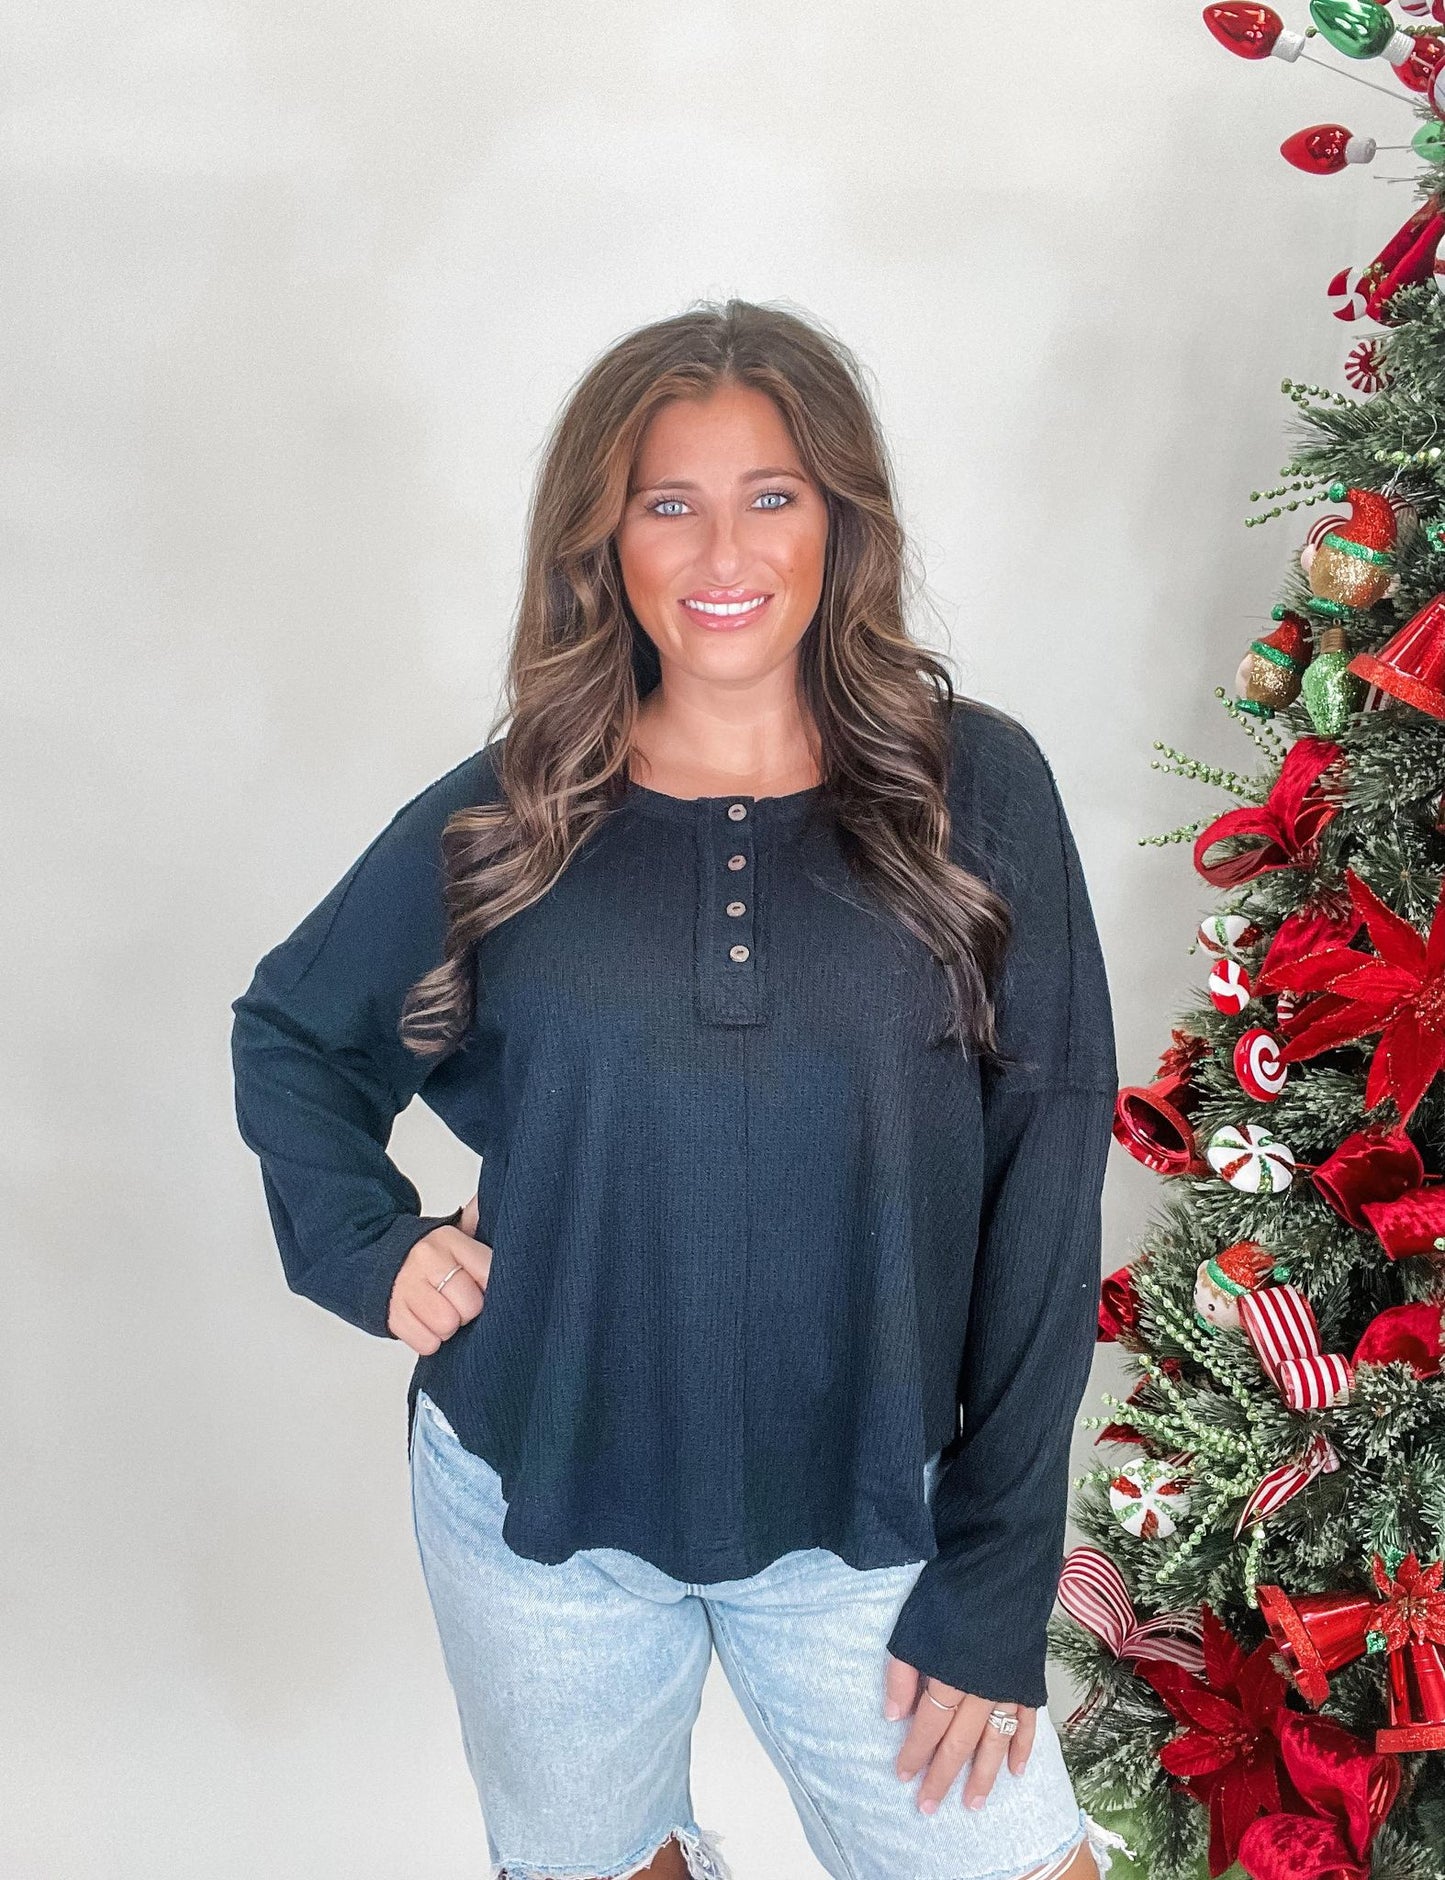 Find Your Joy Knit Top- Black (was $34.90)